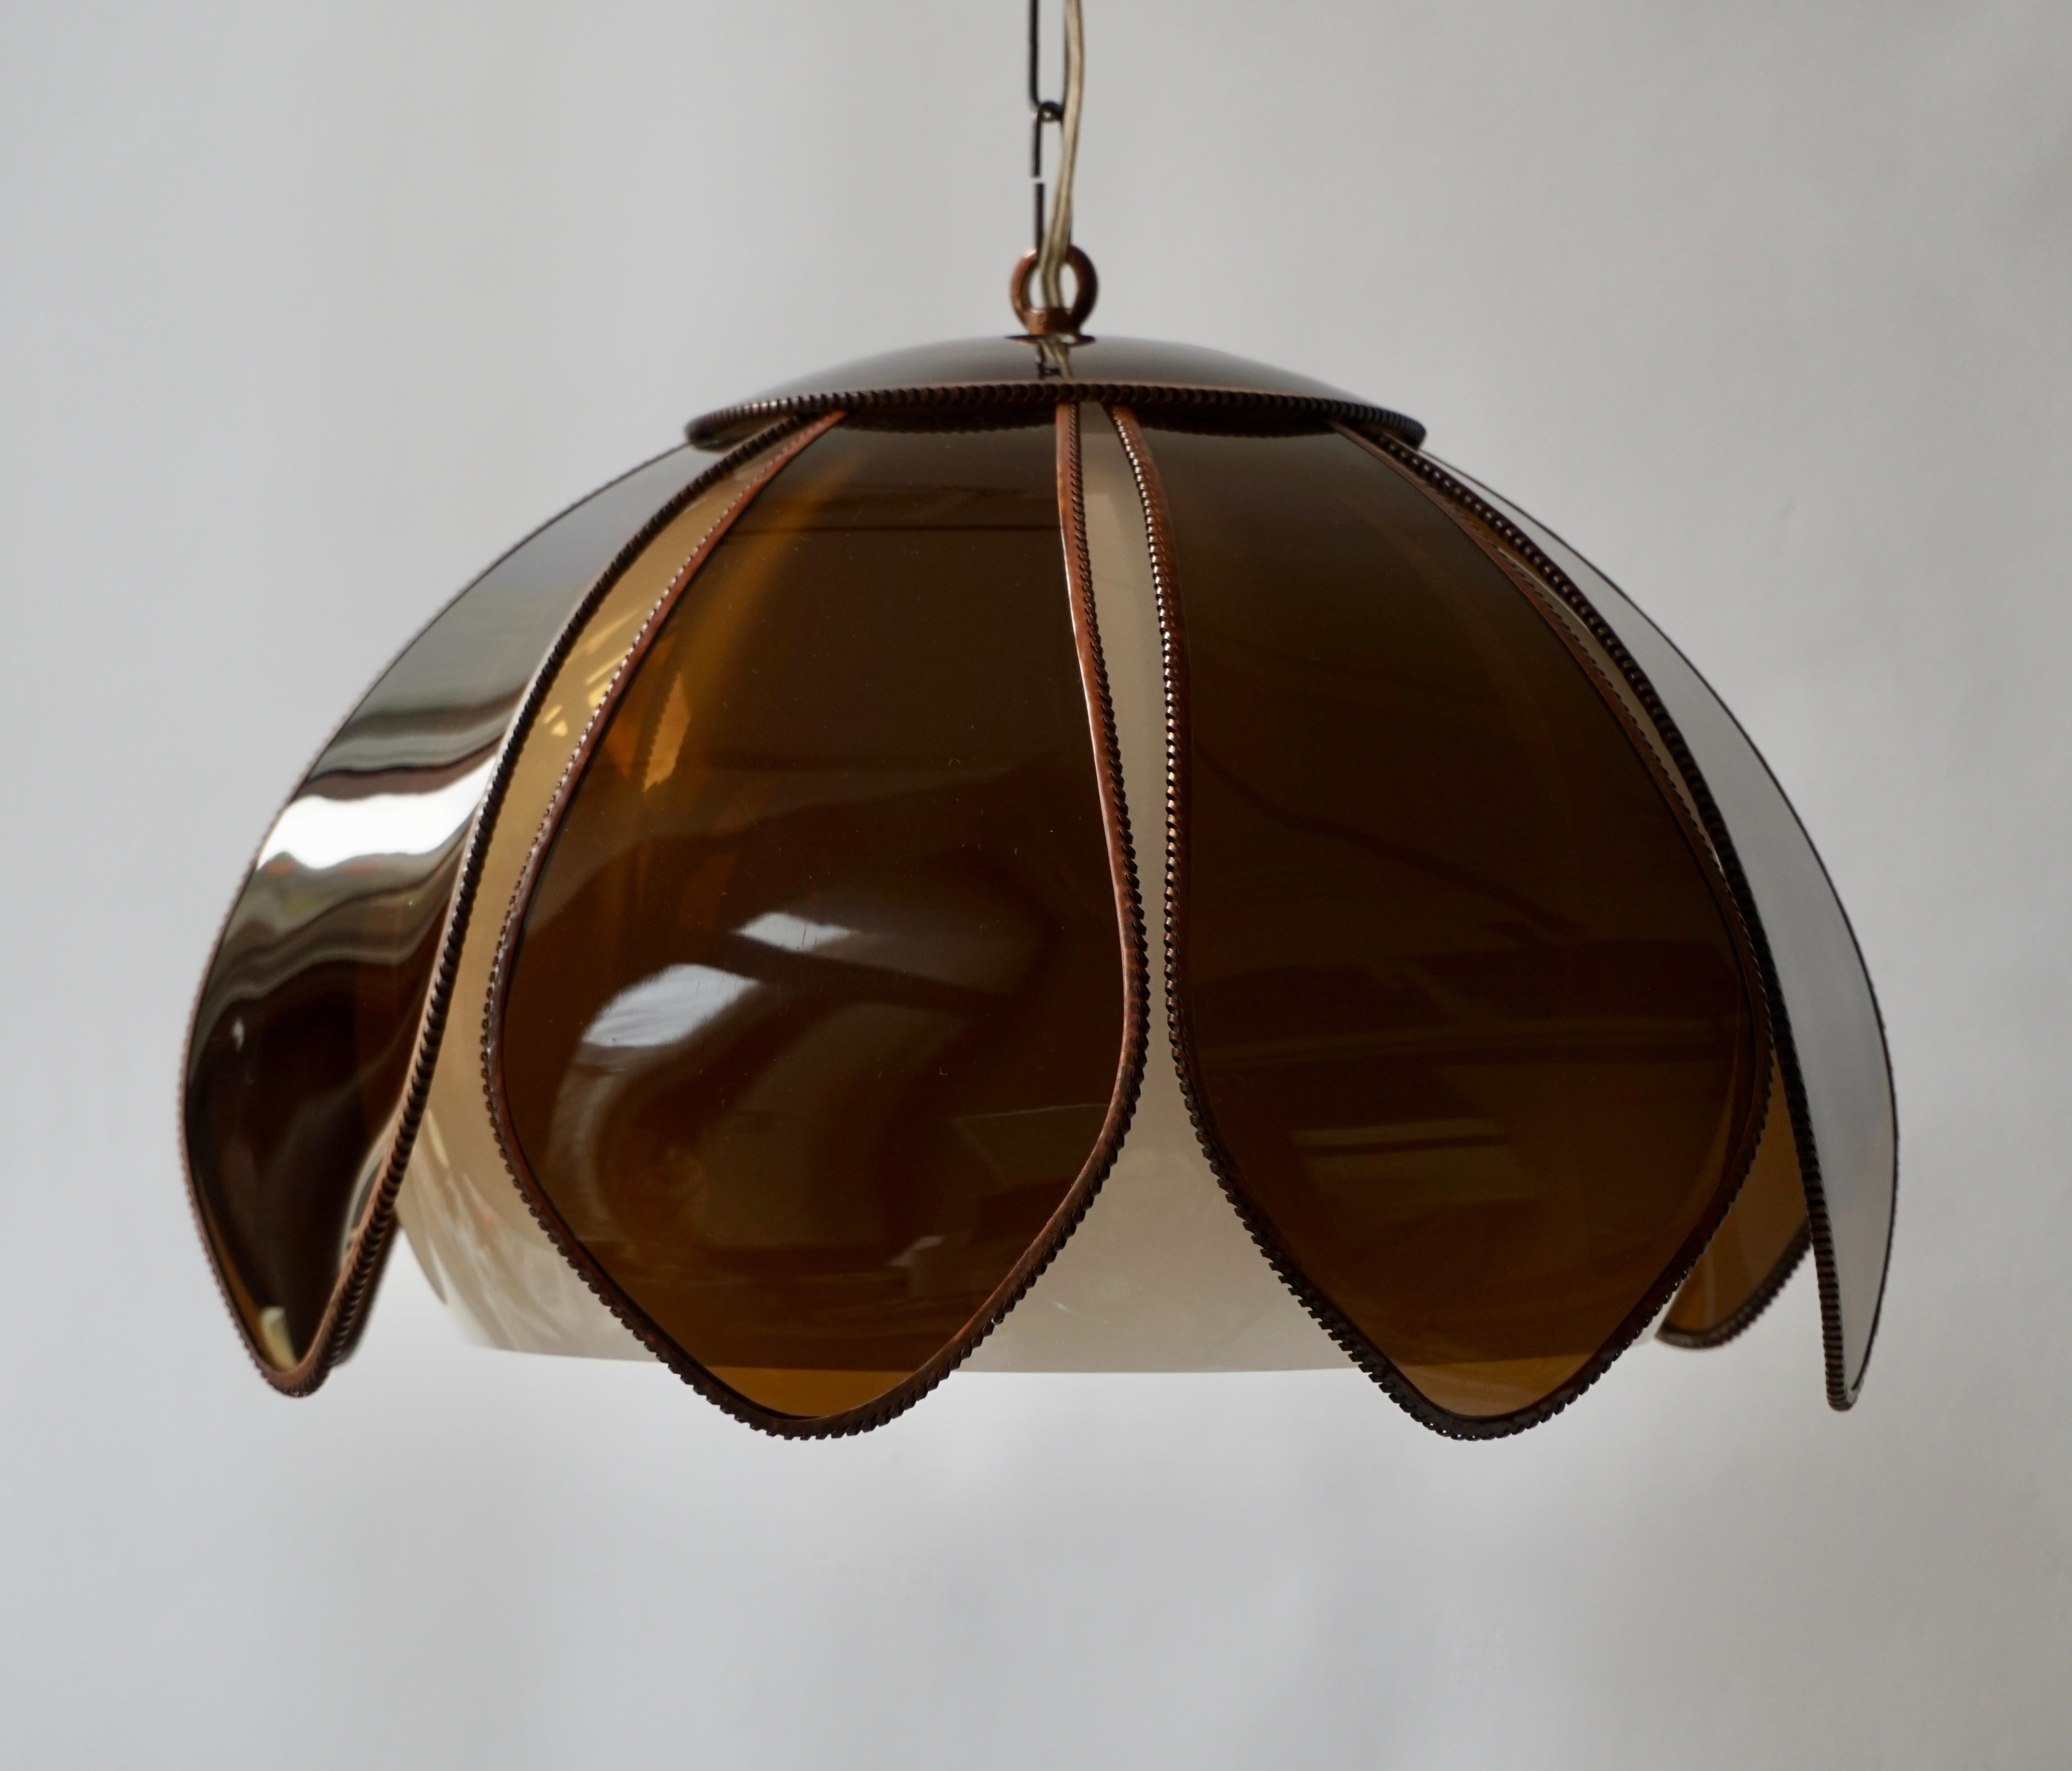 Elegant Italian pendant light or chandelier made of brass with an acrylic shade.
Measures: Diameter 38 cm.
Height fixture 25 cm.
Total height included with the chain and canopy 120 cm.